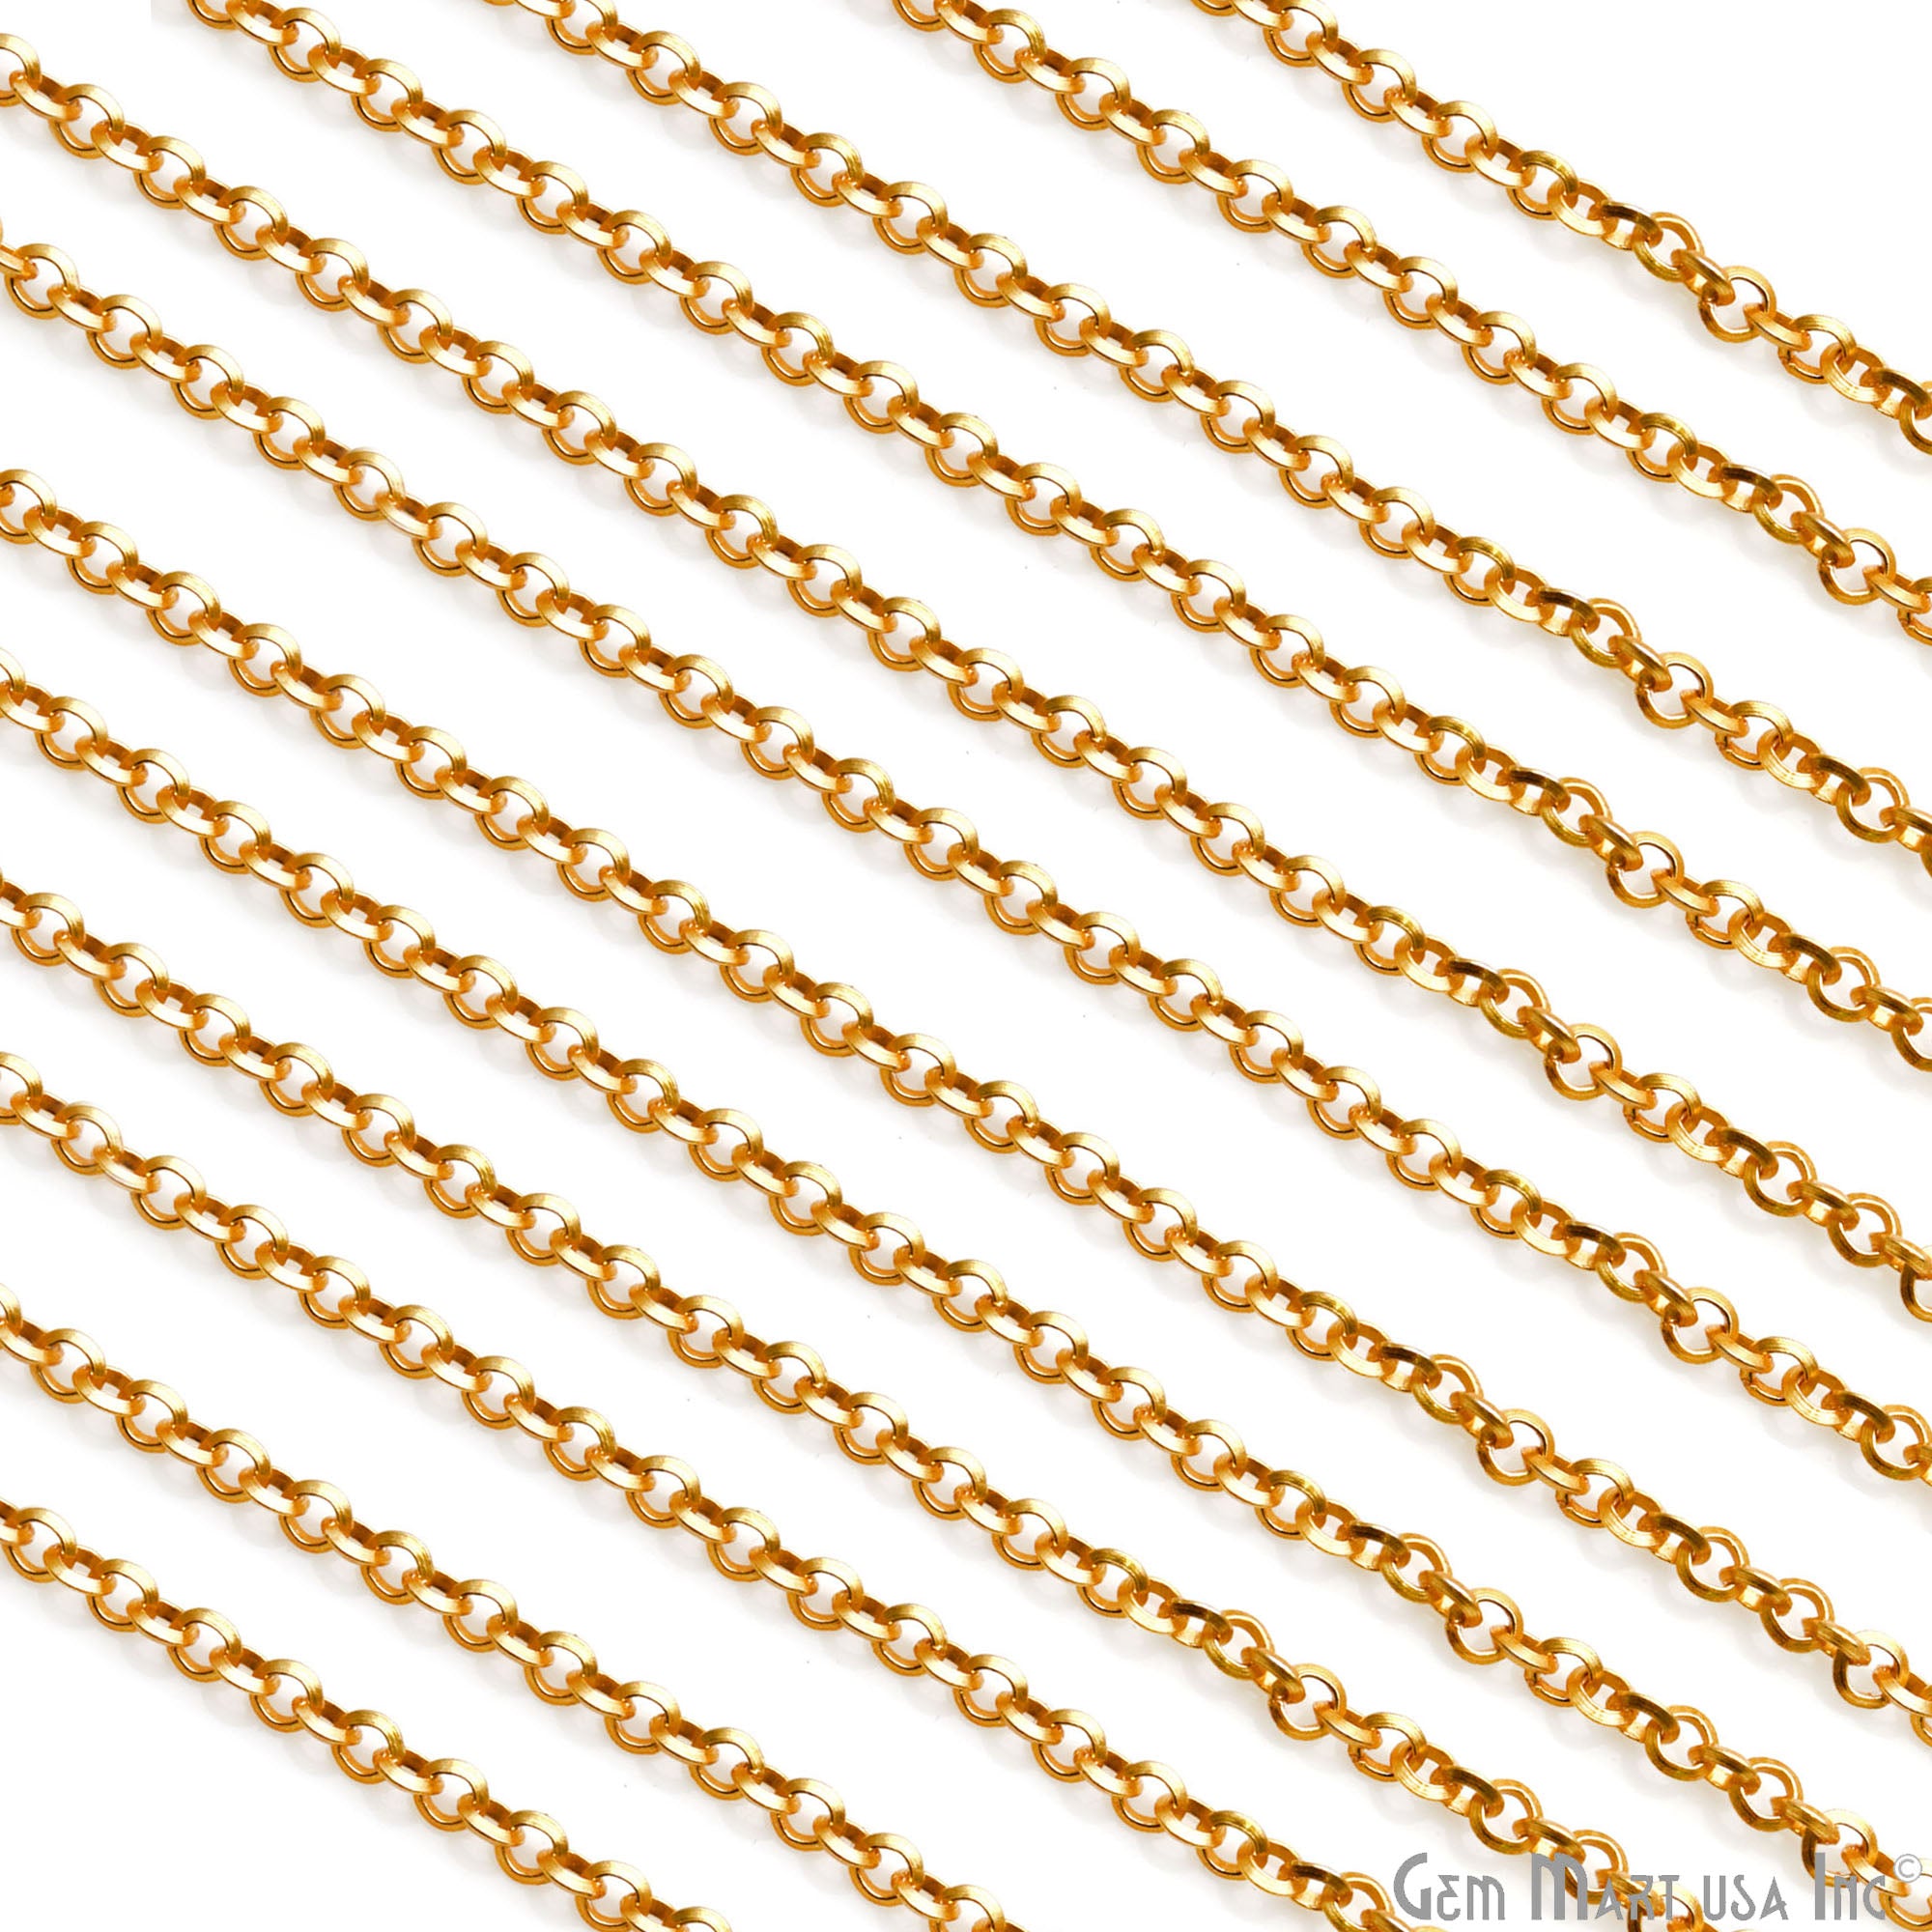 Cable Chain For Jewelry Making 3mm Cable Link Chain Necklace